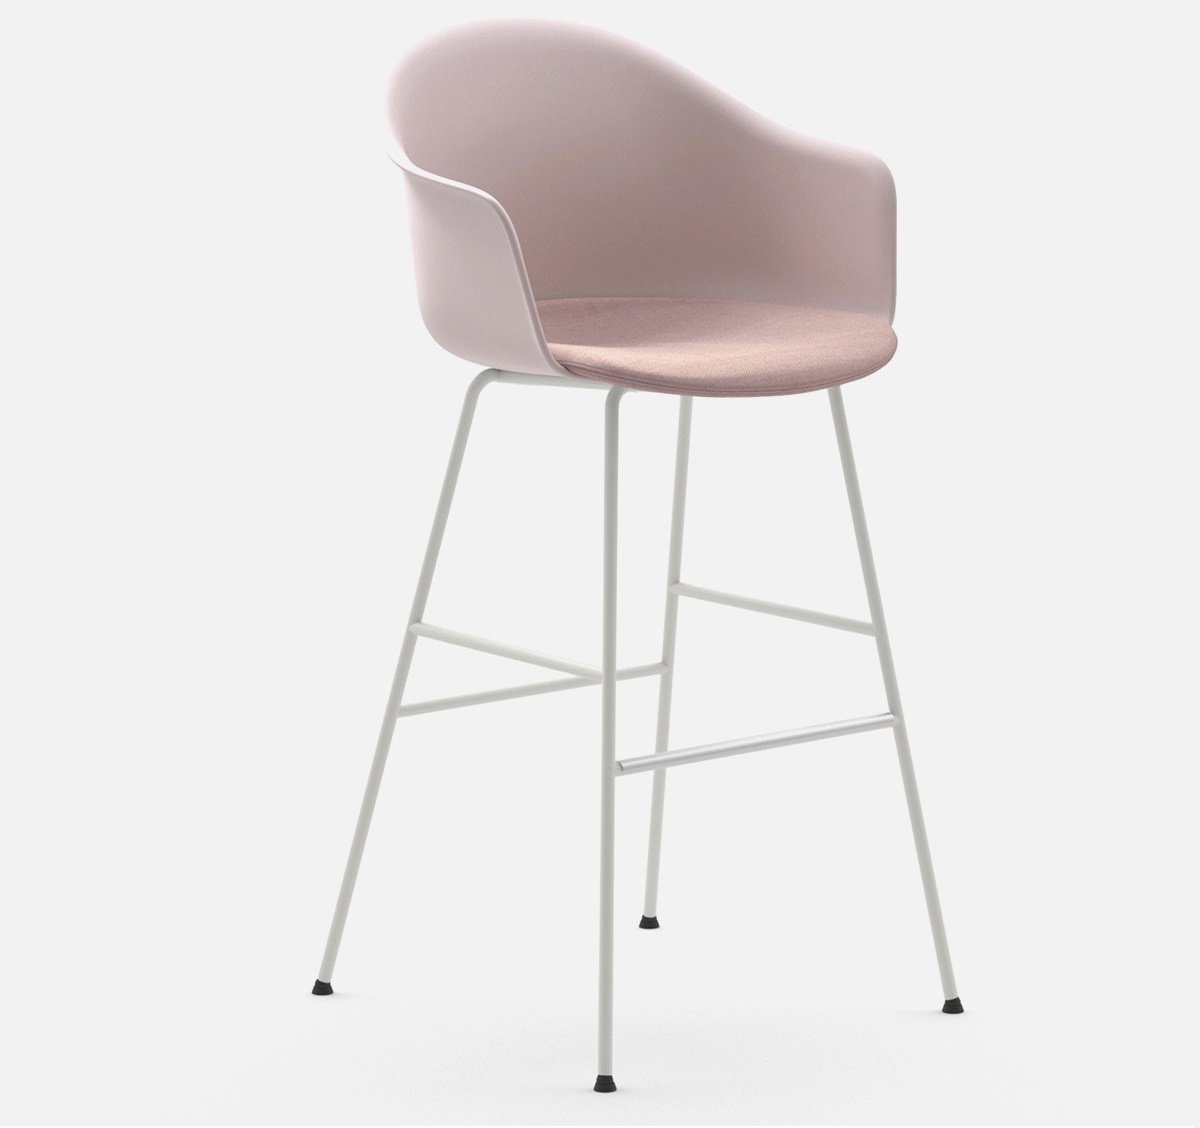 Mani Armshell ST-4L/ns Stool from Arrmet, designed by Welling/Ludvik